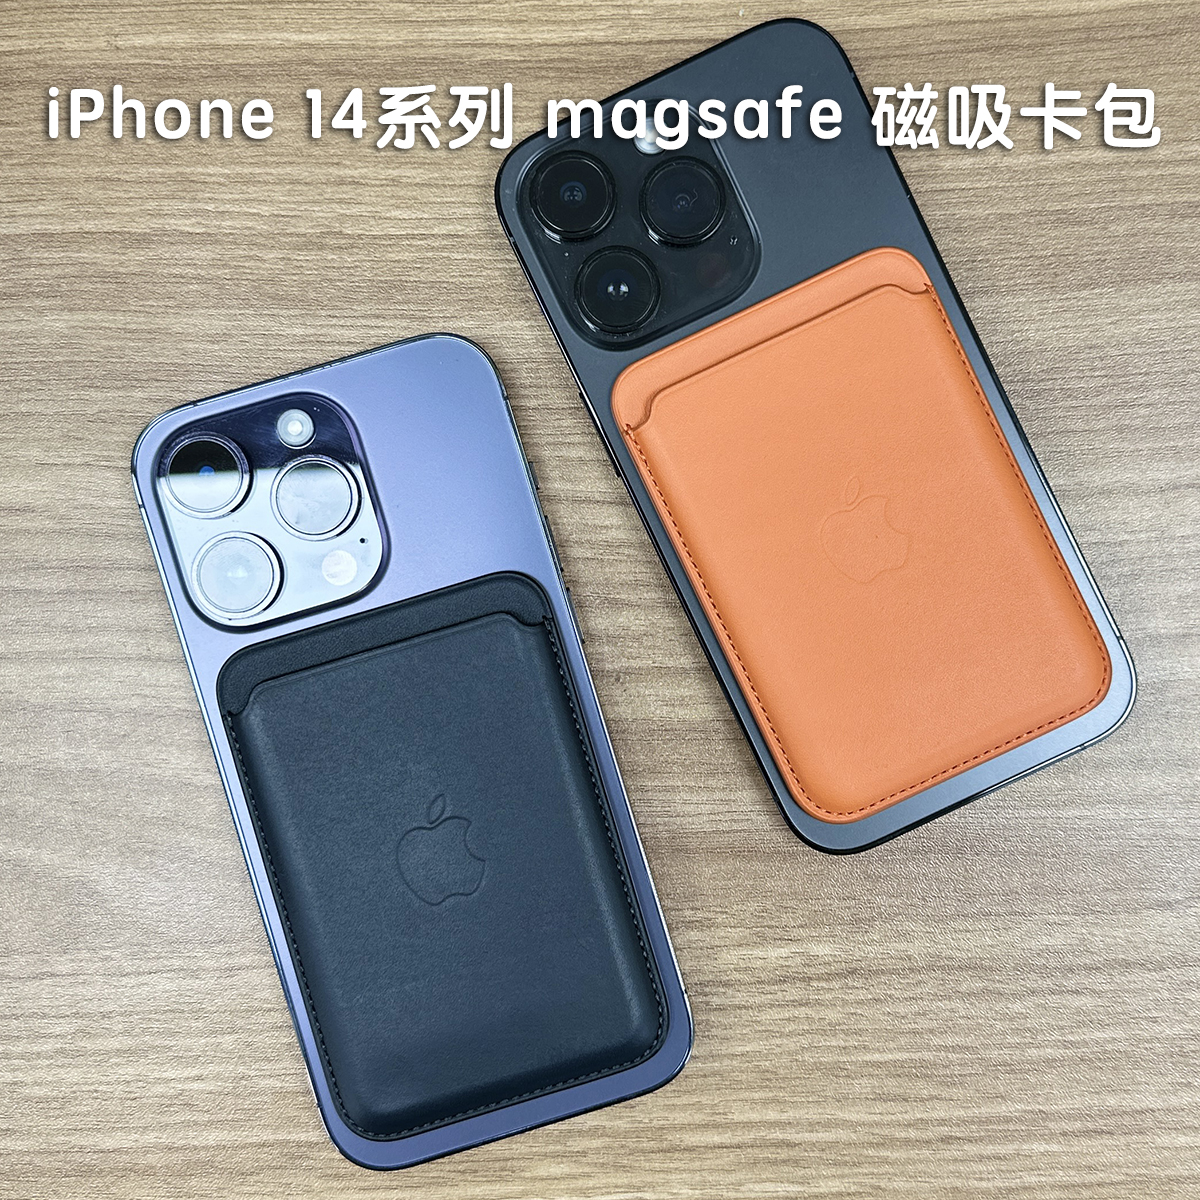 iPhone 磁吸卡包 真皮Leather magsafe Wallet背吸定位卡包